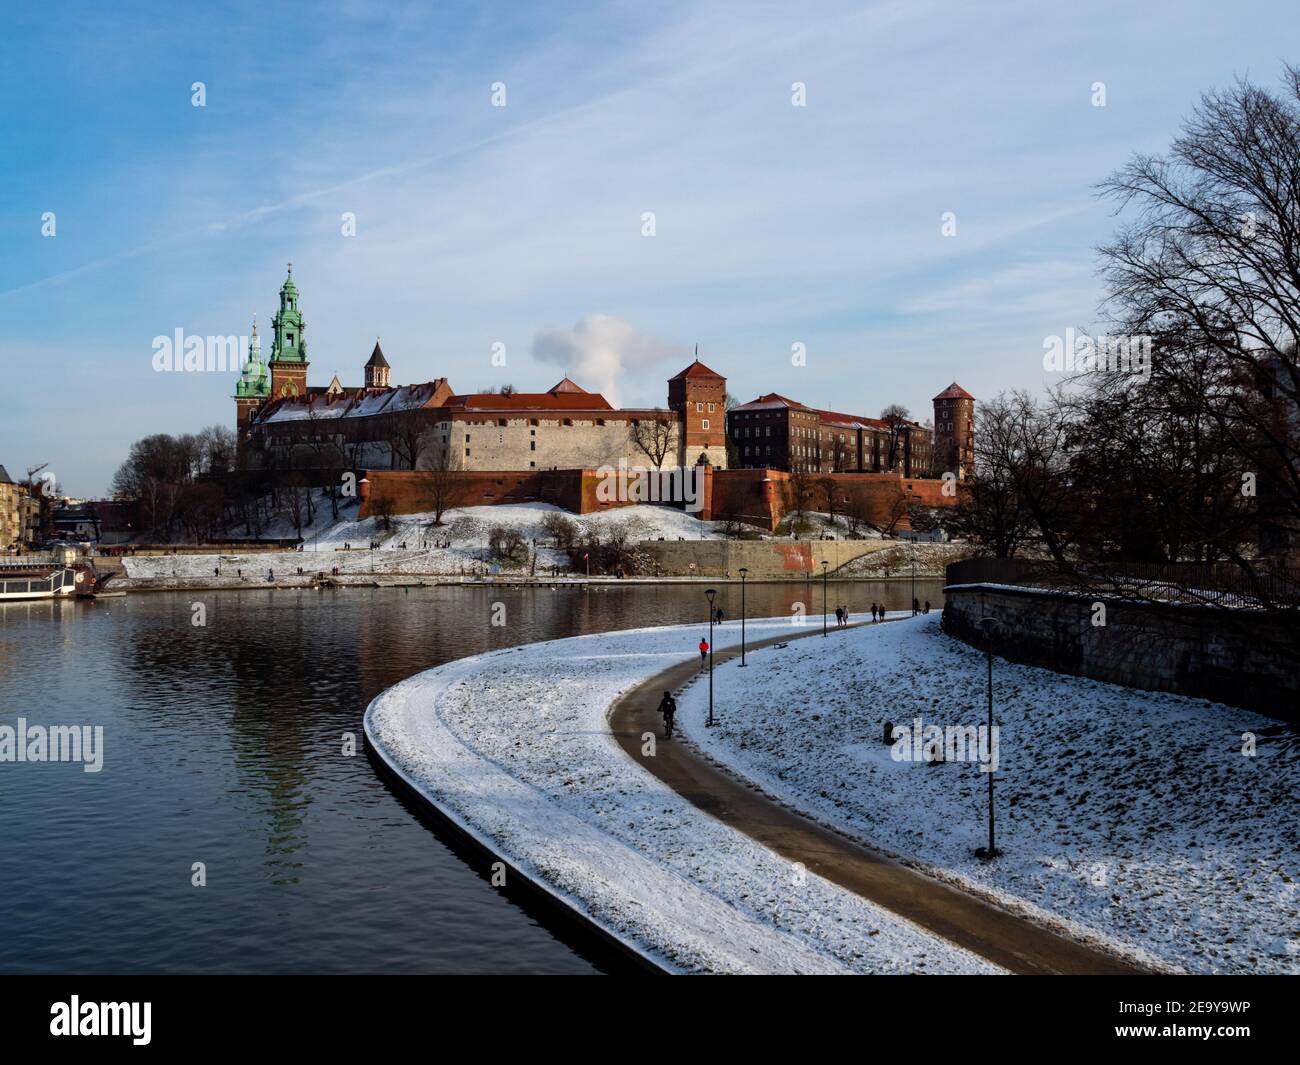 31/01/2021 - Poland/Cracow - view over Vistula River and Wawel Castle, the biggest attraction of Cracow. Winter time. View over the castle and river b Stock Photo